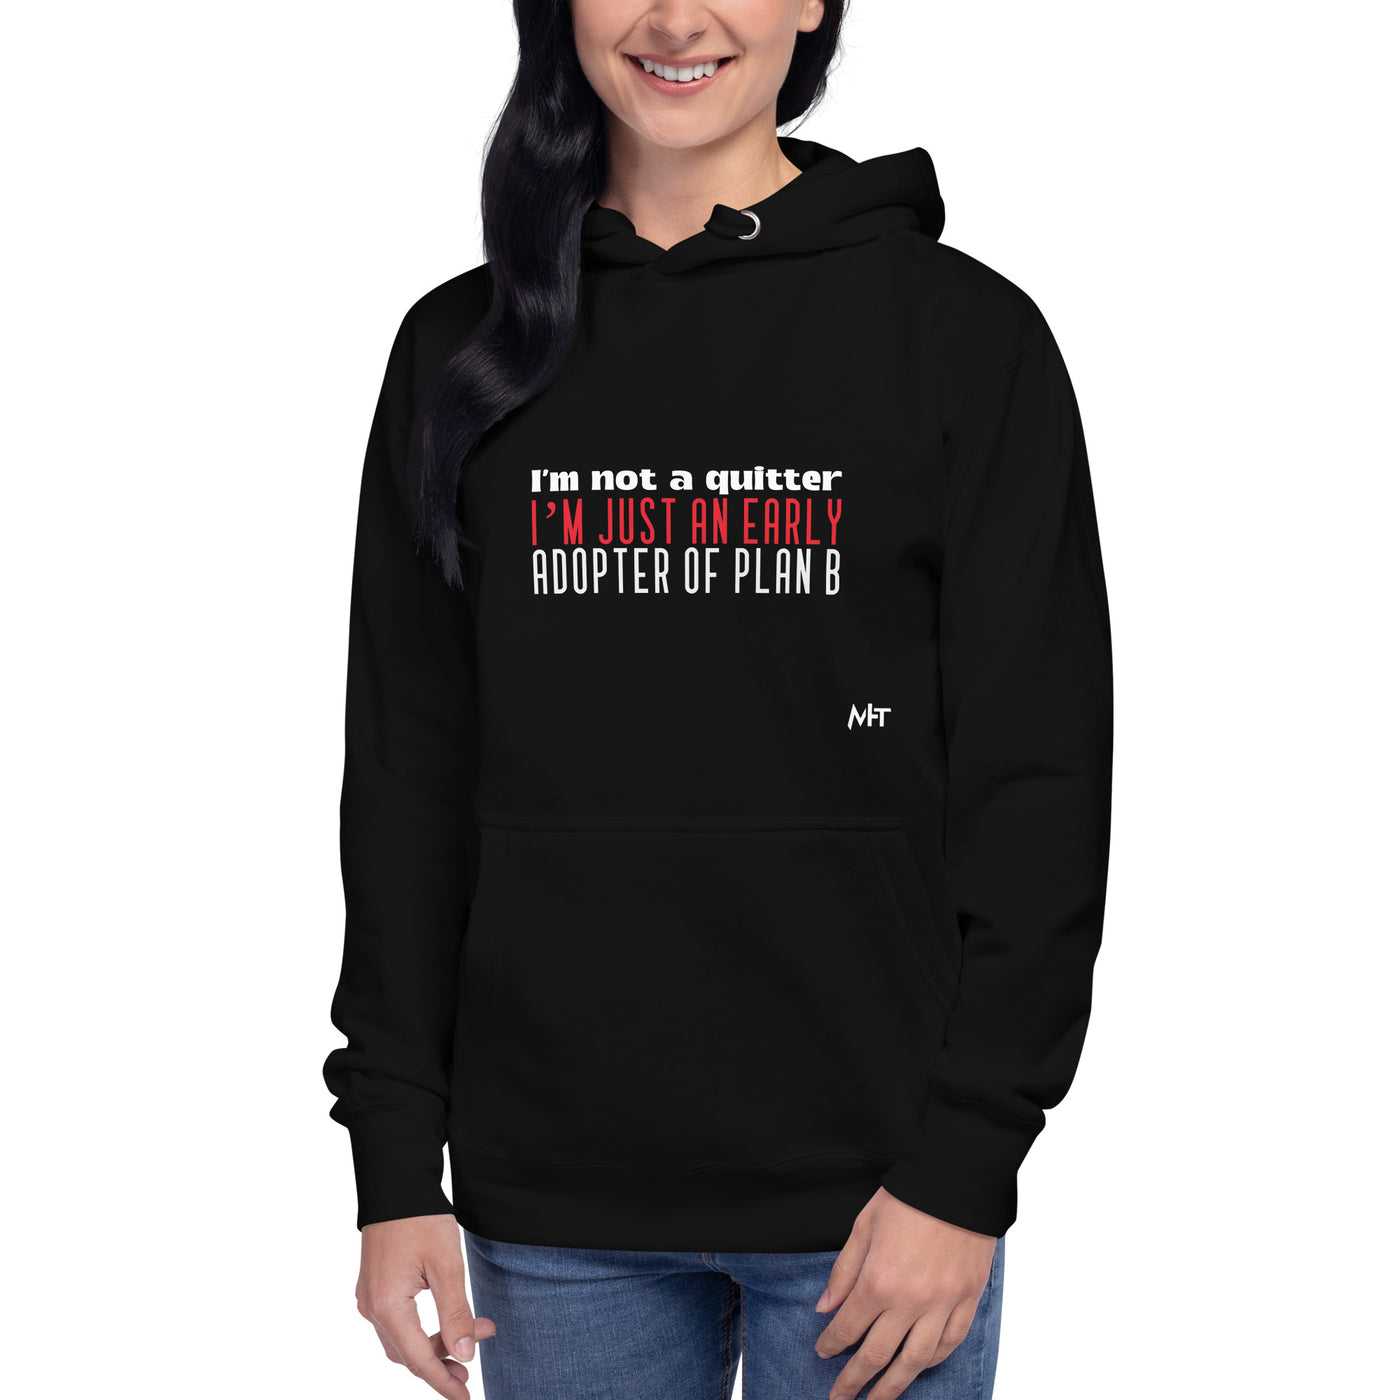 I Am not a Quitter: I Am an early adopter of Plan B - Unisex Hoodie